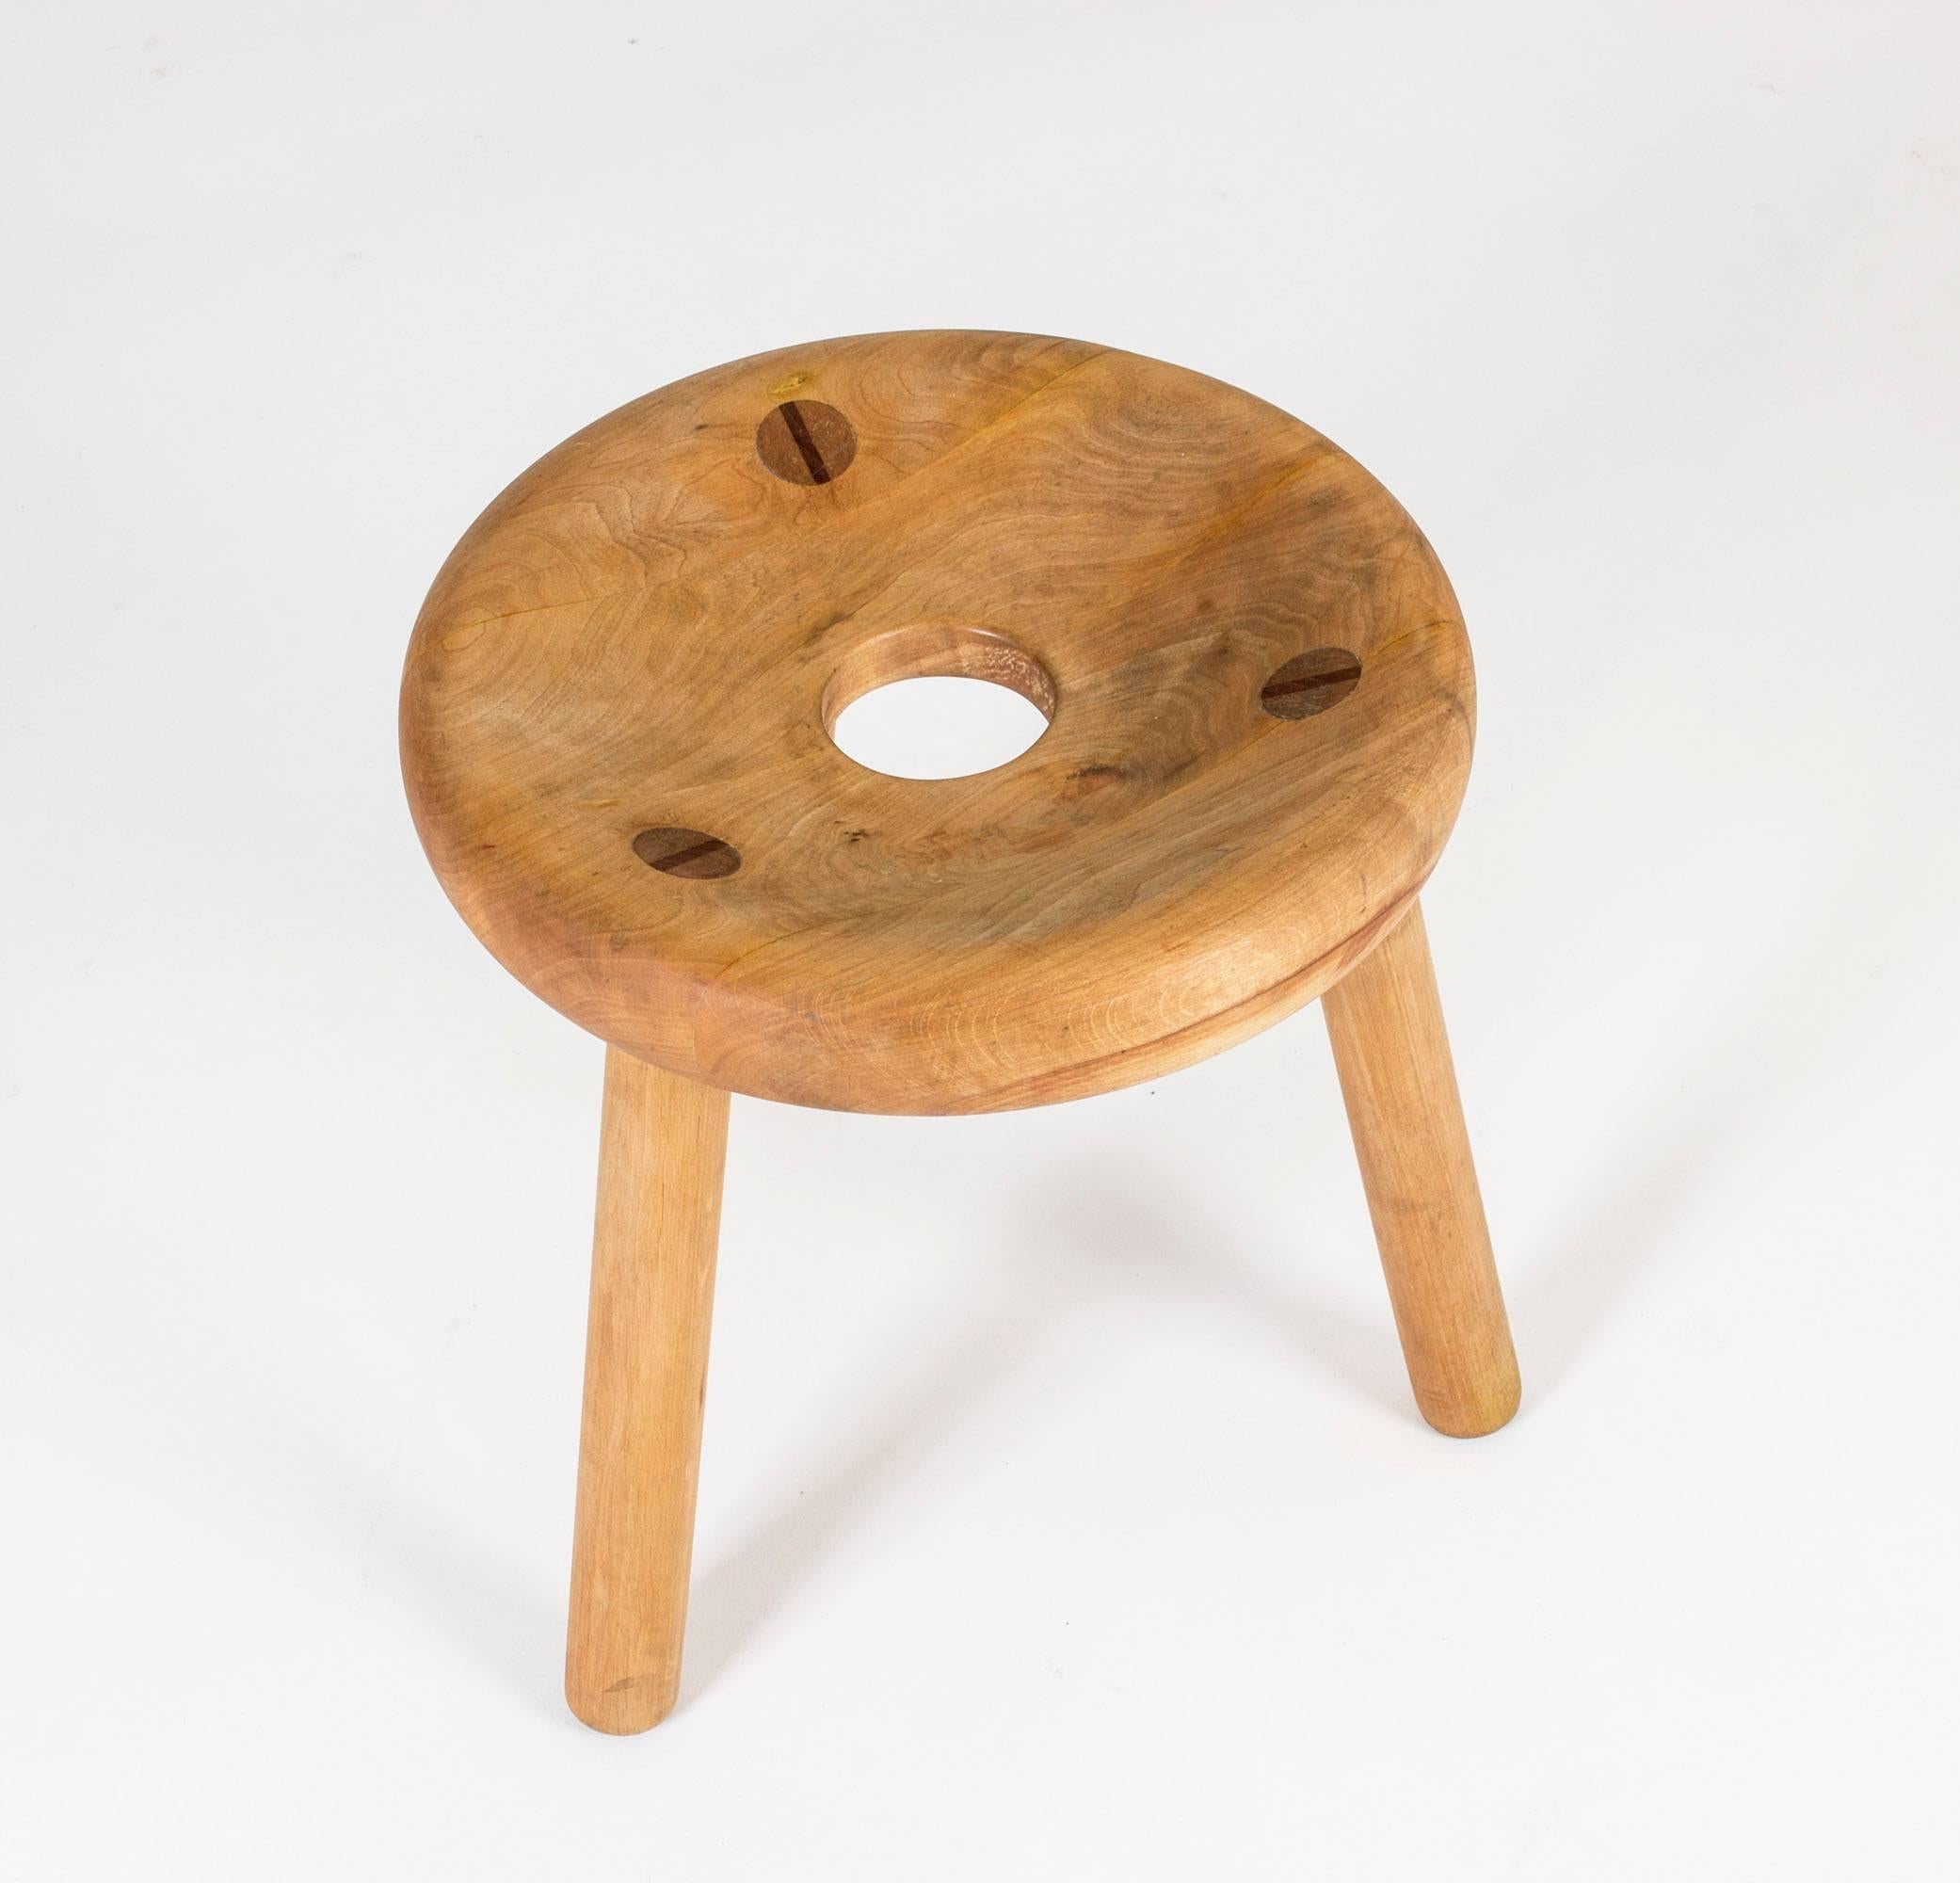 Oak sauna stool by Bertel Gardberg with a hole in the middle and contrasting color wooden plugs. Very appealing, plump design and nice patina.